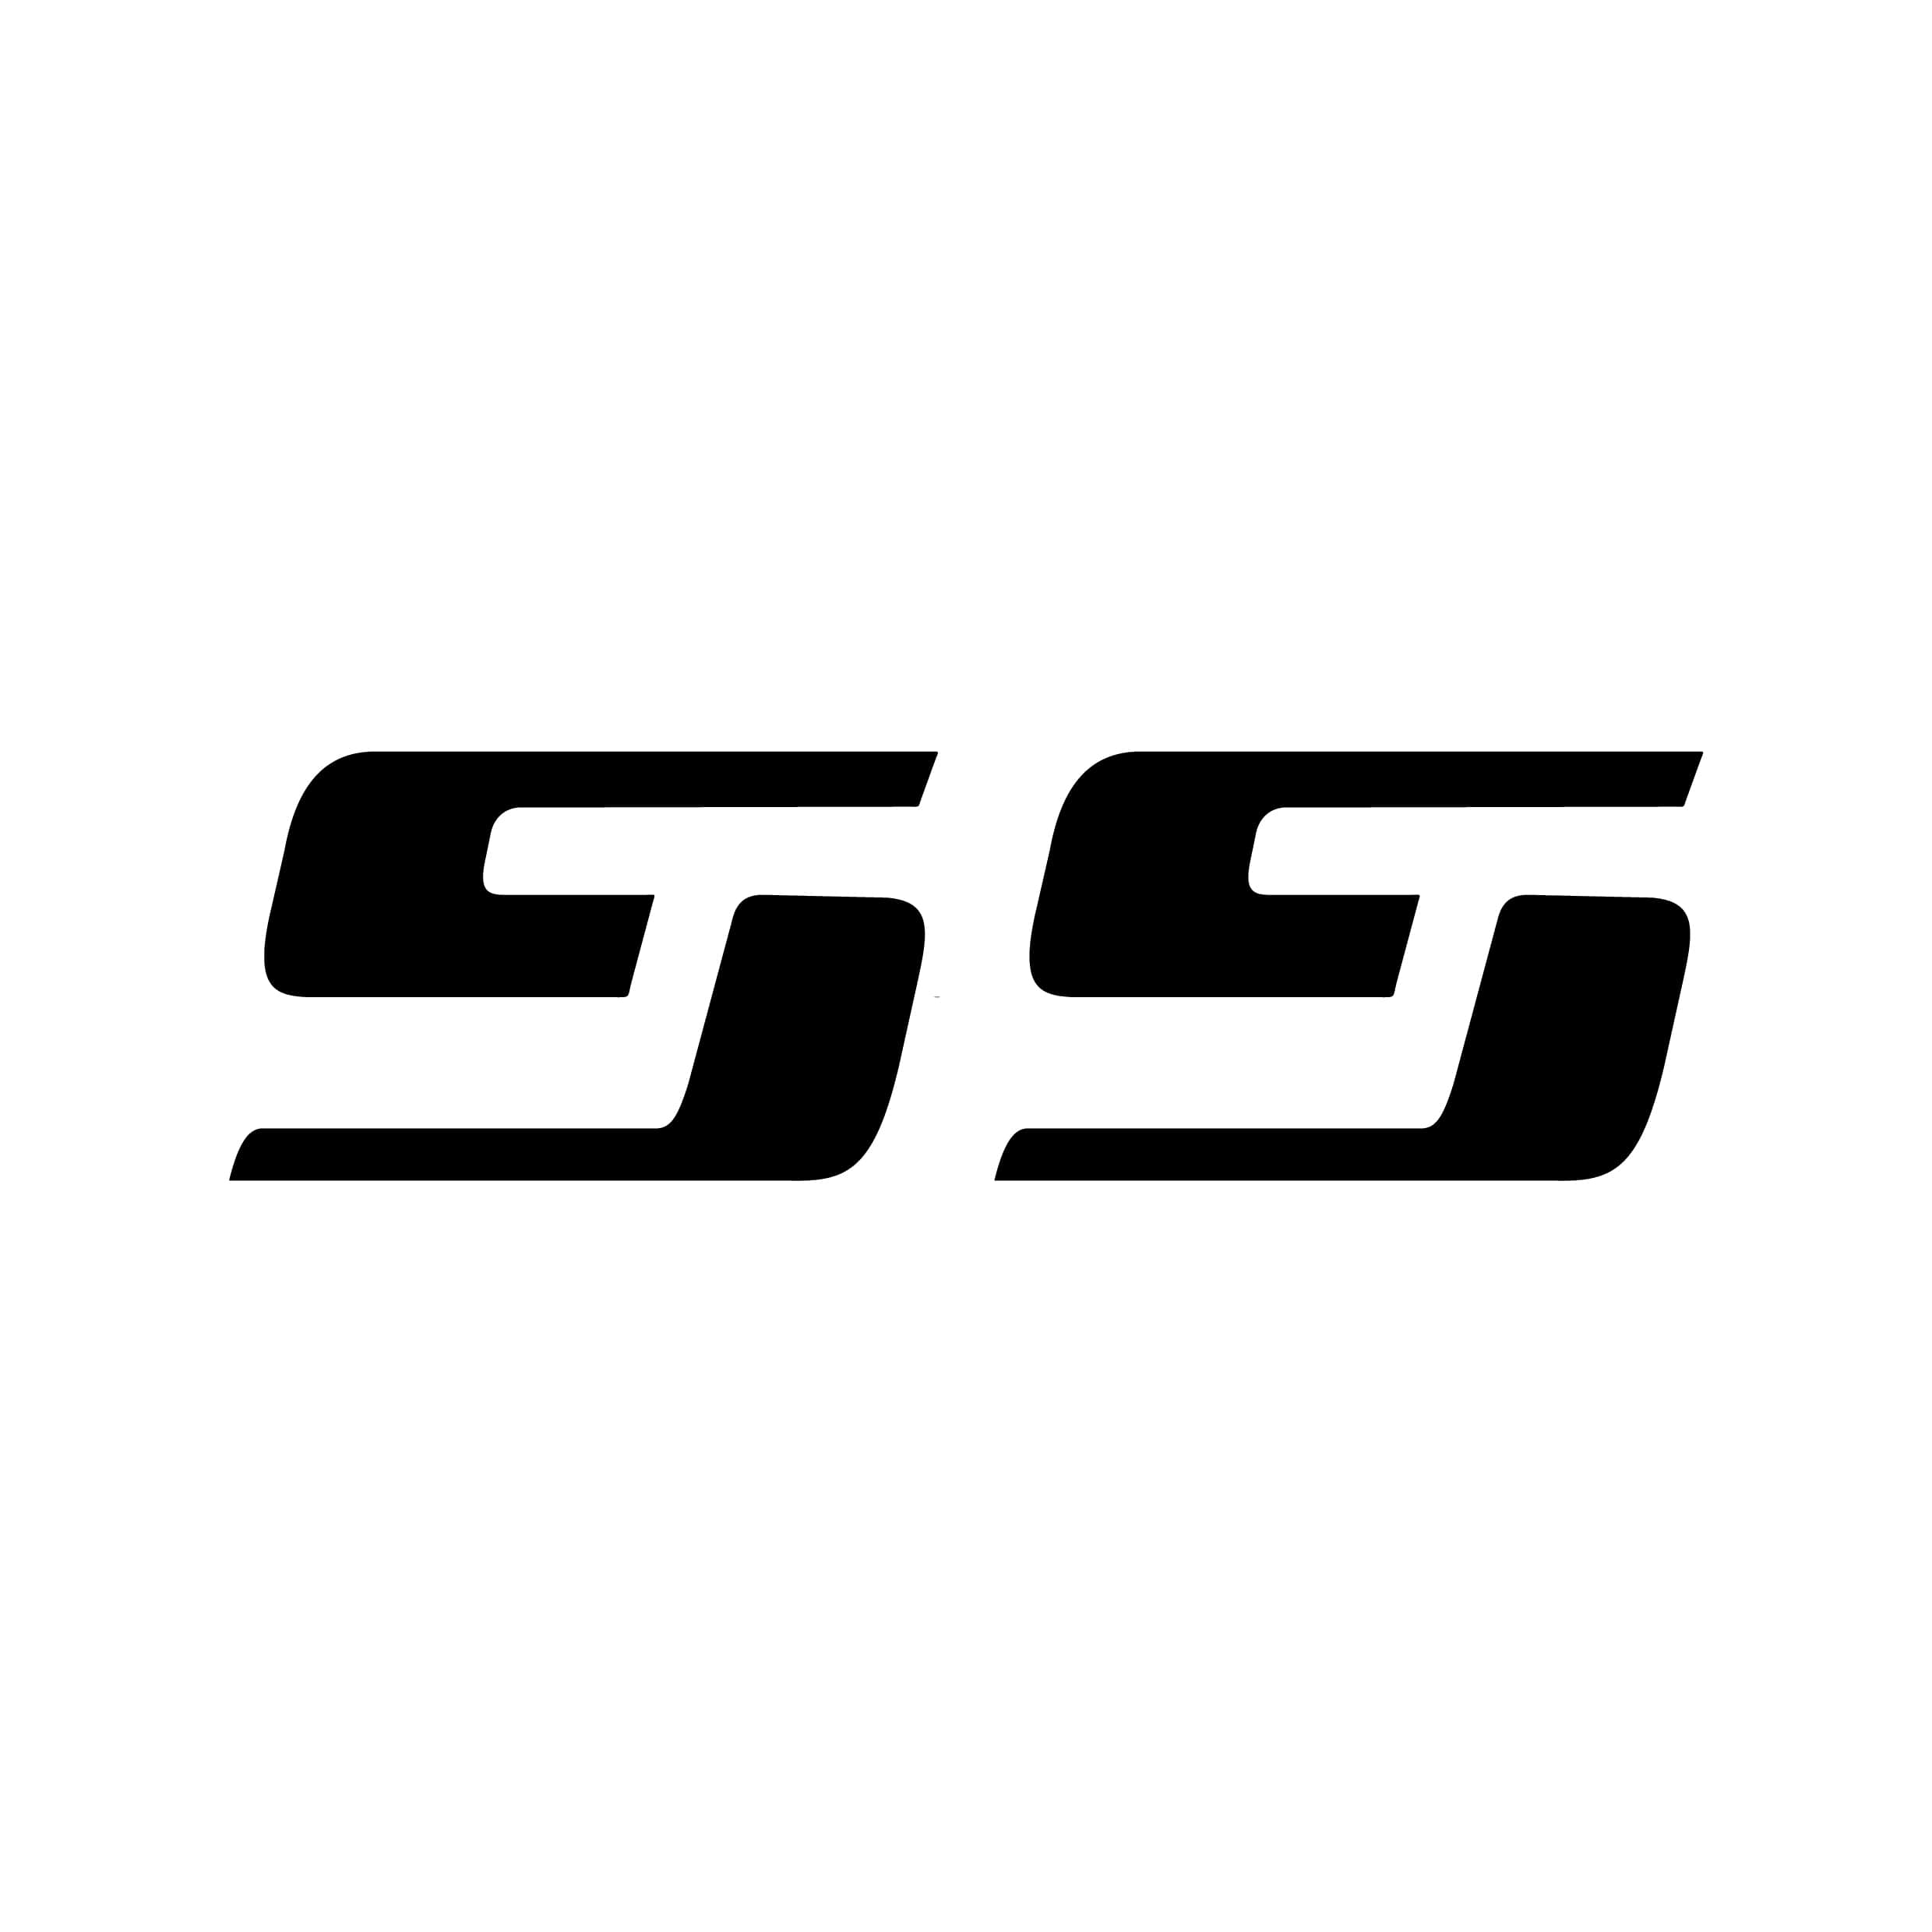 stickers-chevrolet-ss-ref22-autocollant-voiture-sticker-auto-autocollants-decals-sponsors-racing-tuning